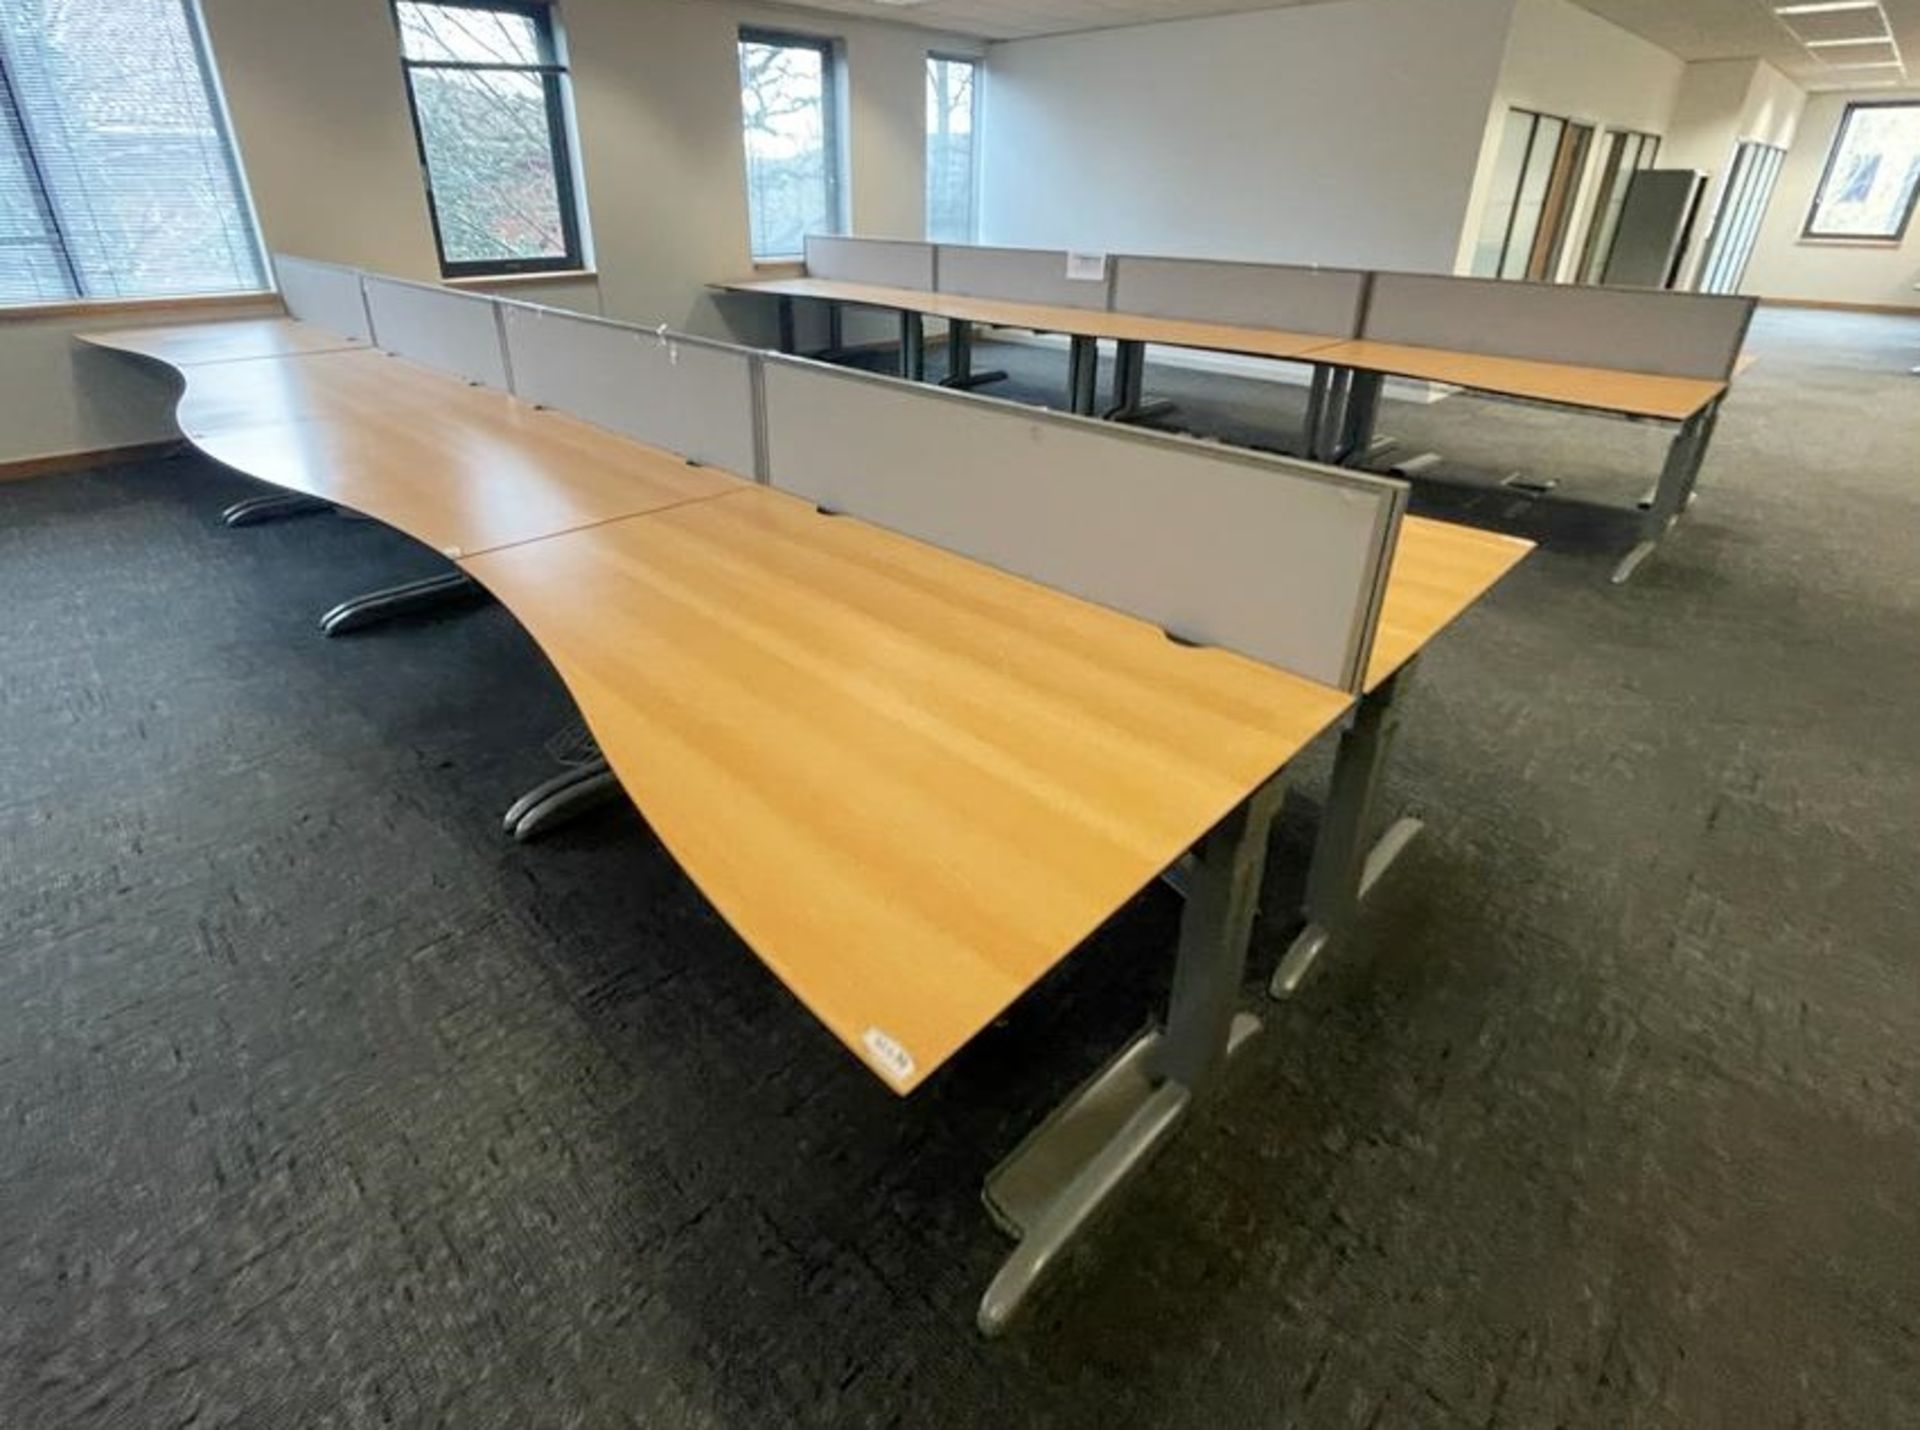 8 x Techo Wave Office Desks With Privacy Panels and Cable Tidy Cages - Beech Wood Finish with Grey - Image 13 of 20